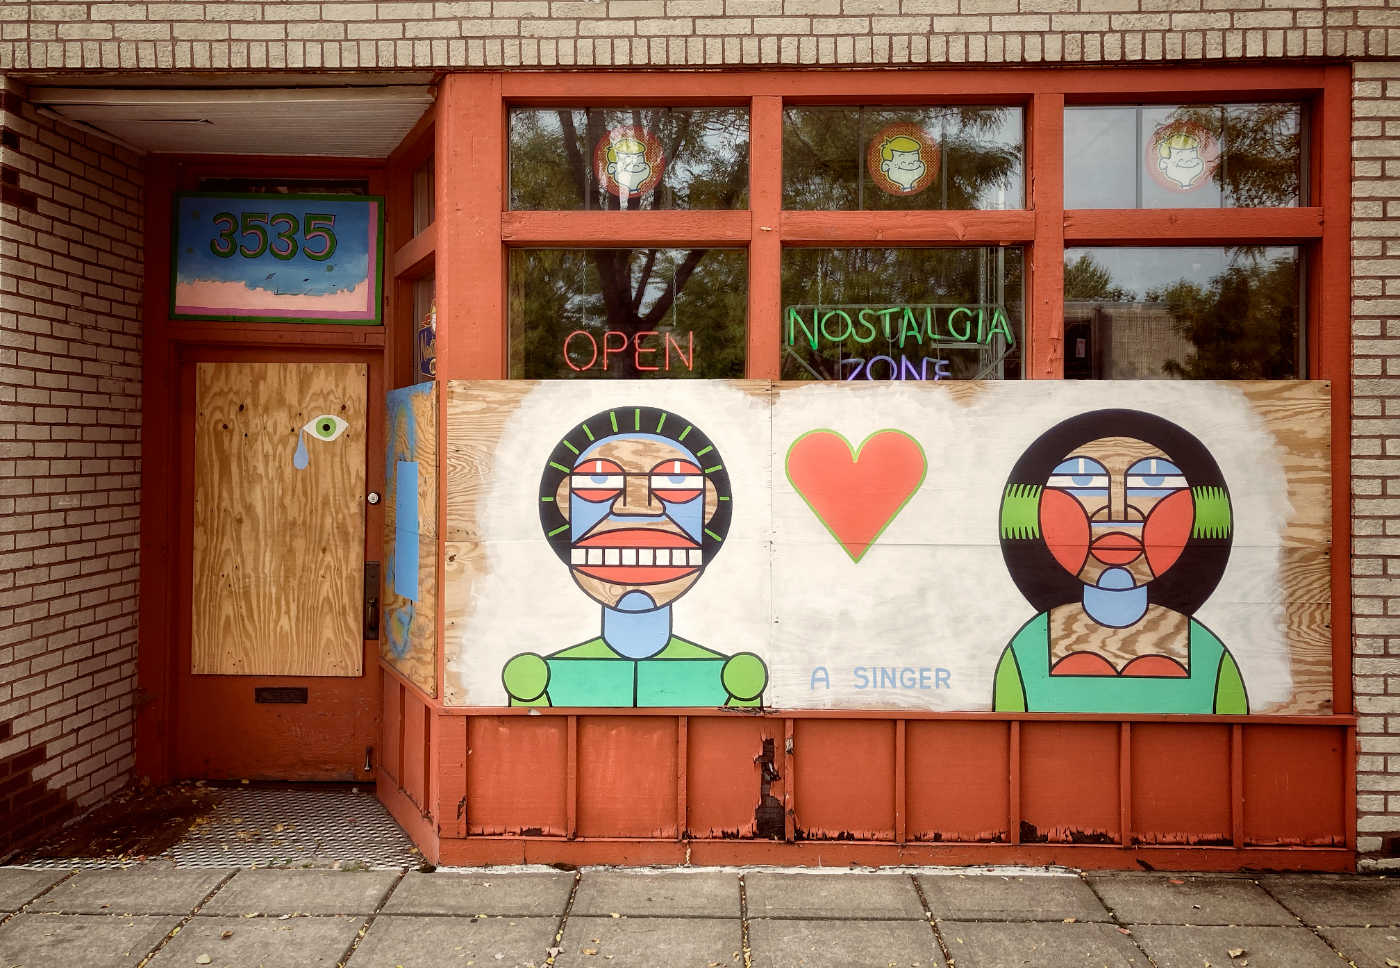 Storefront with partially boarded windows painted with a mural of cartoonish abstract figures and a red heart